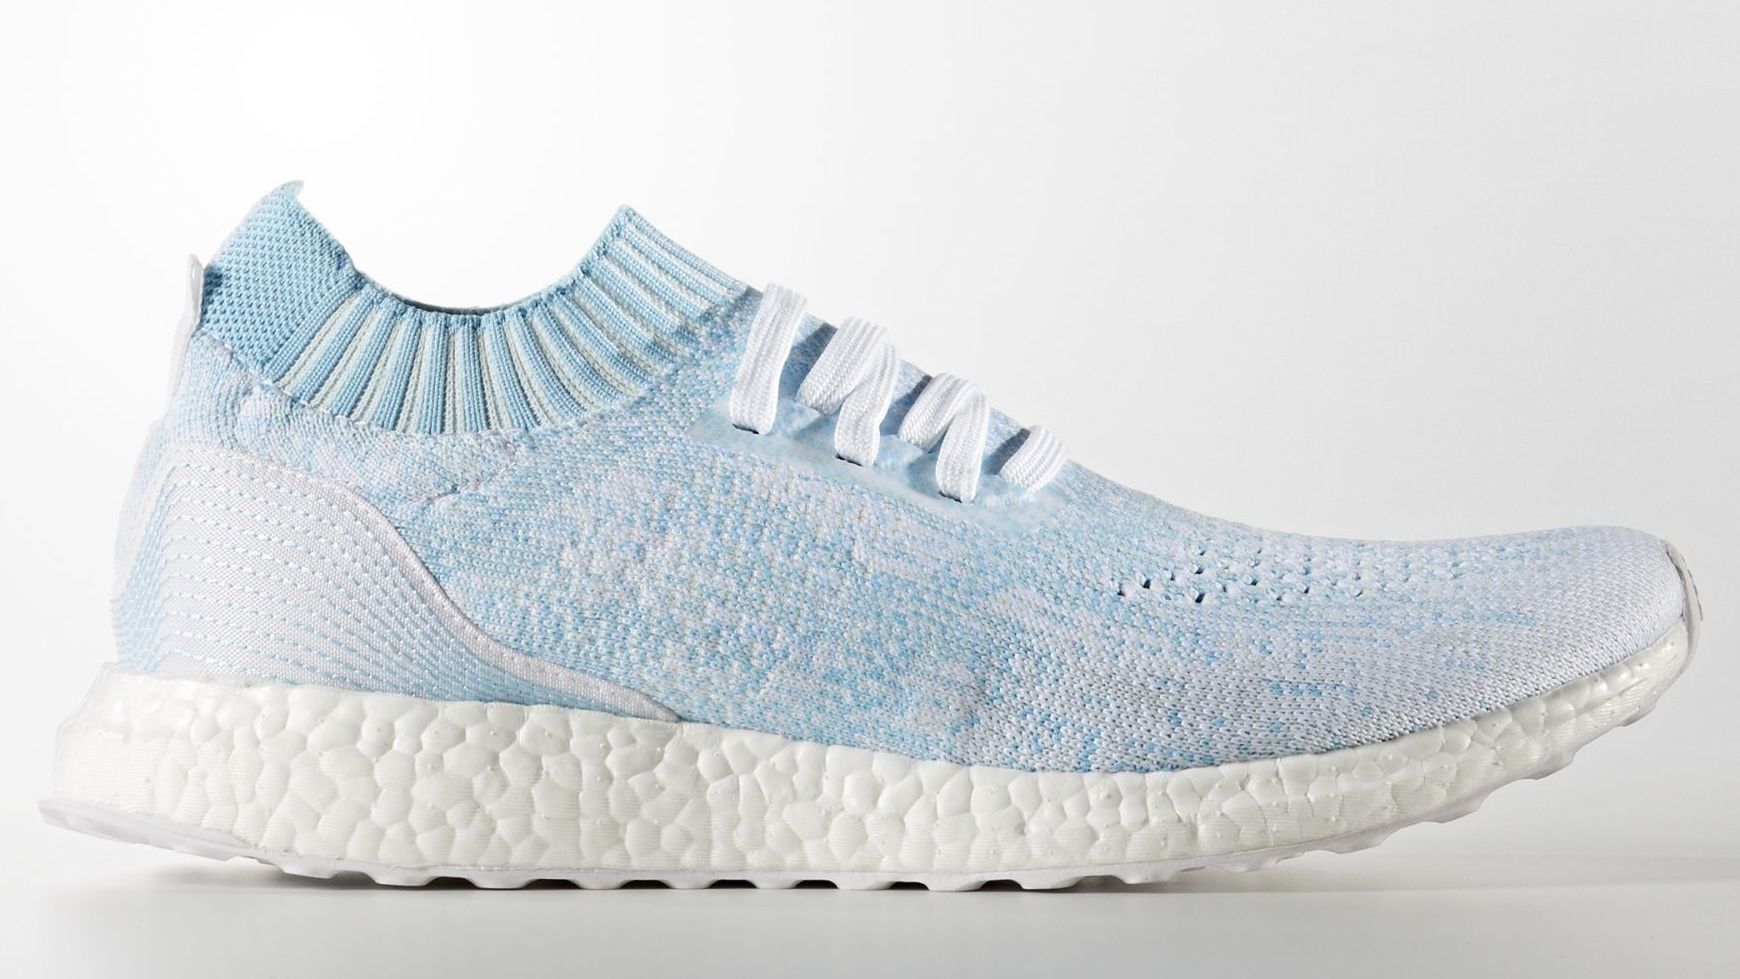 Adidas Ultraboost Uncaged Parley